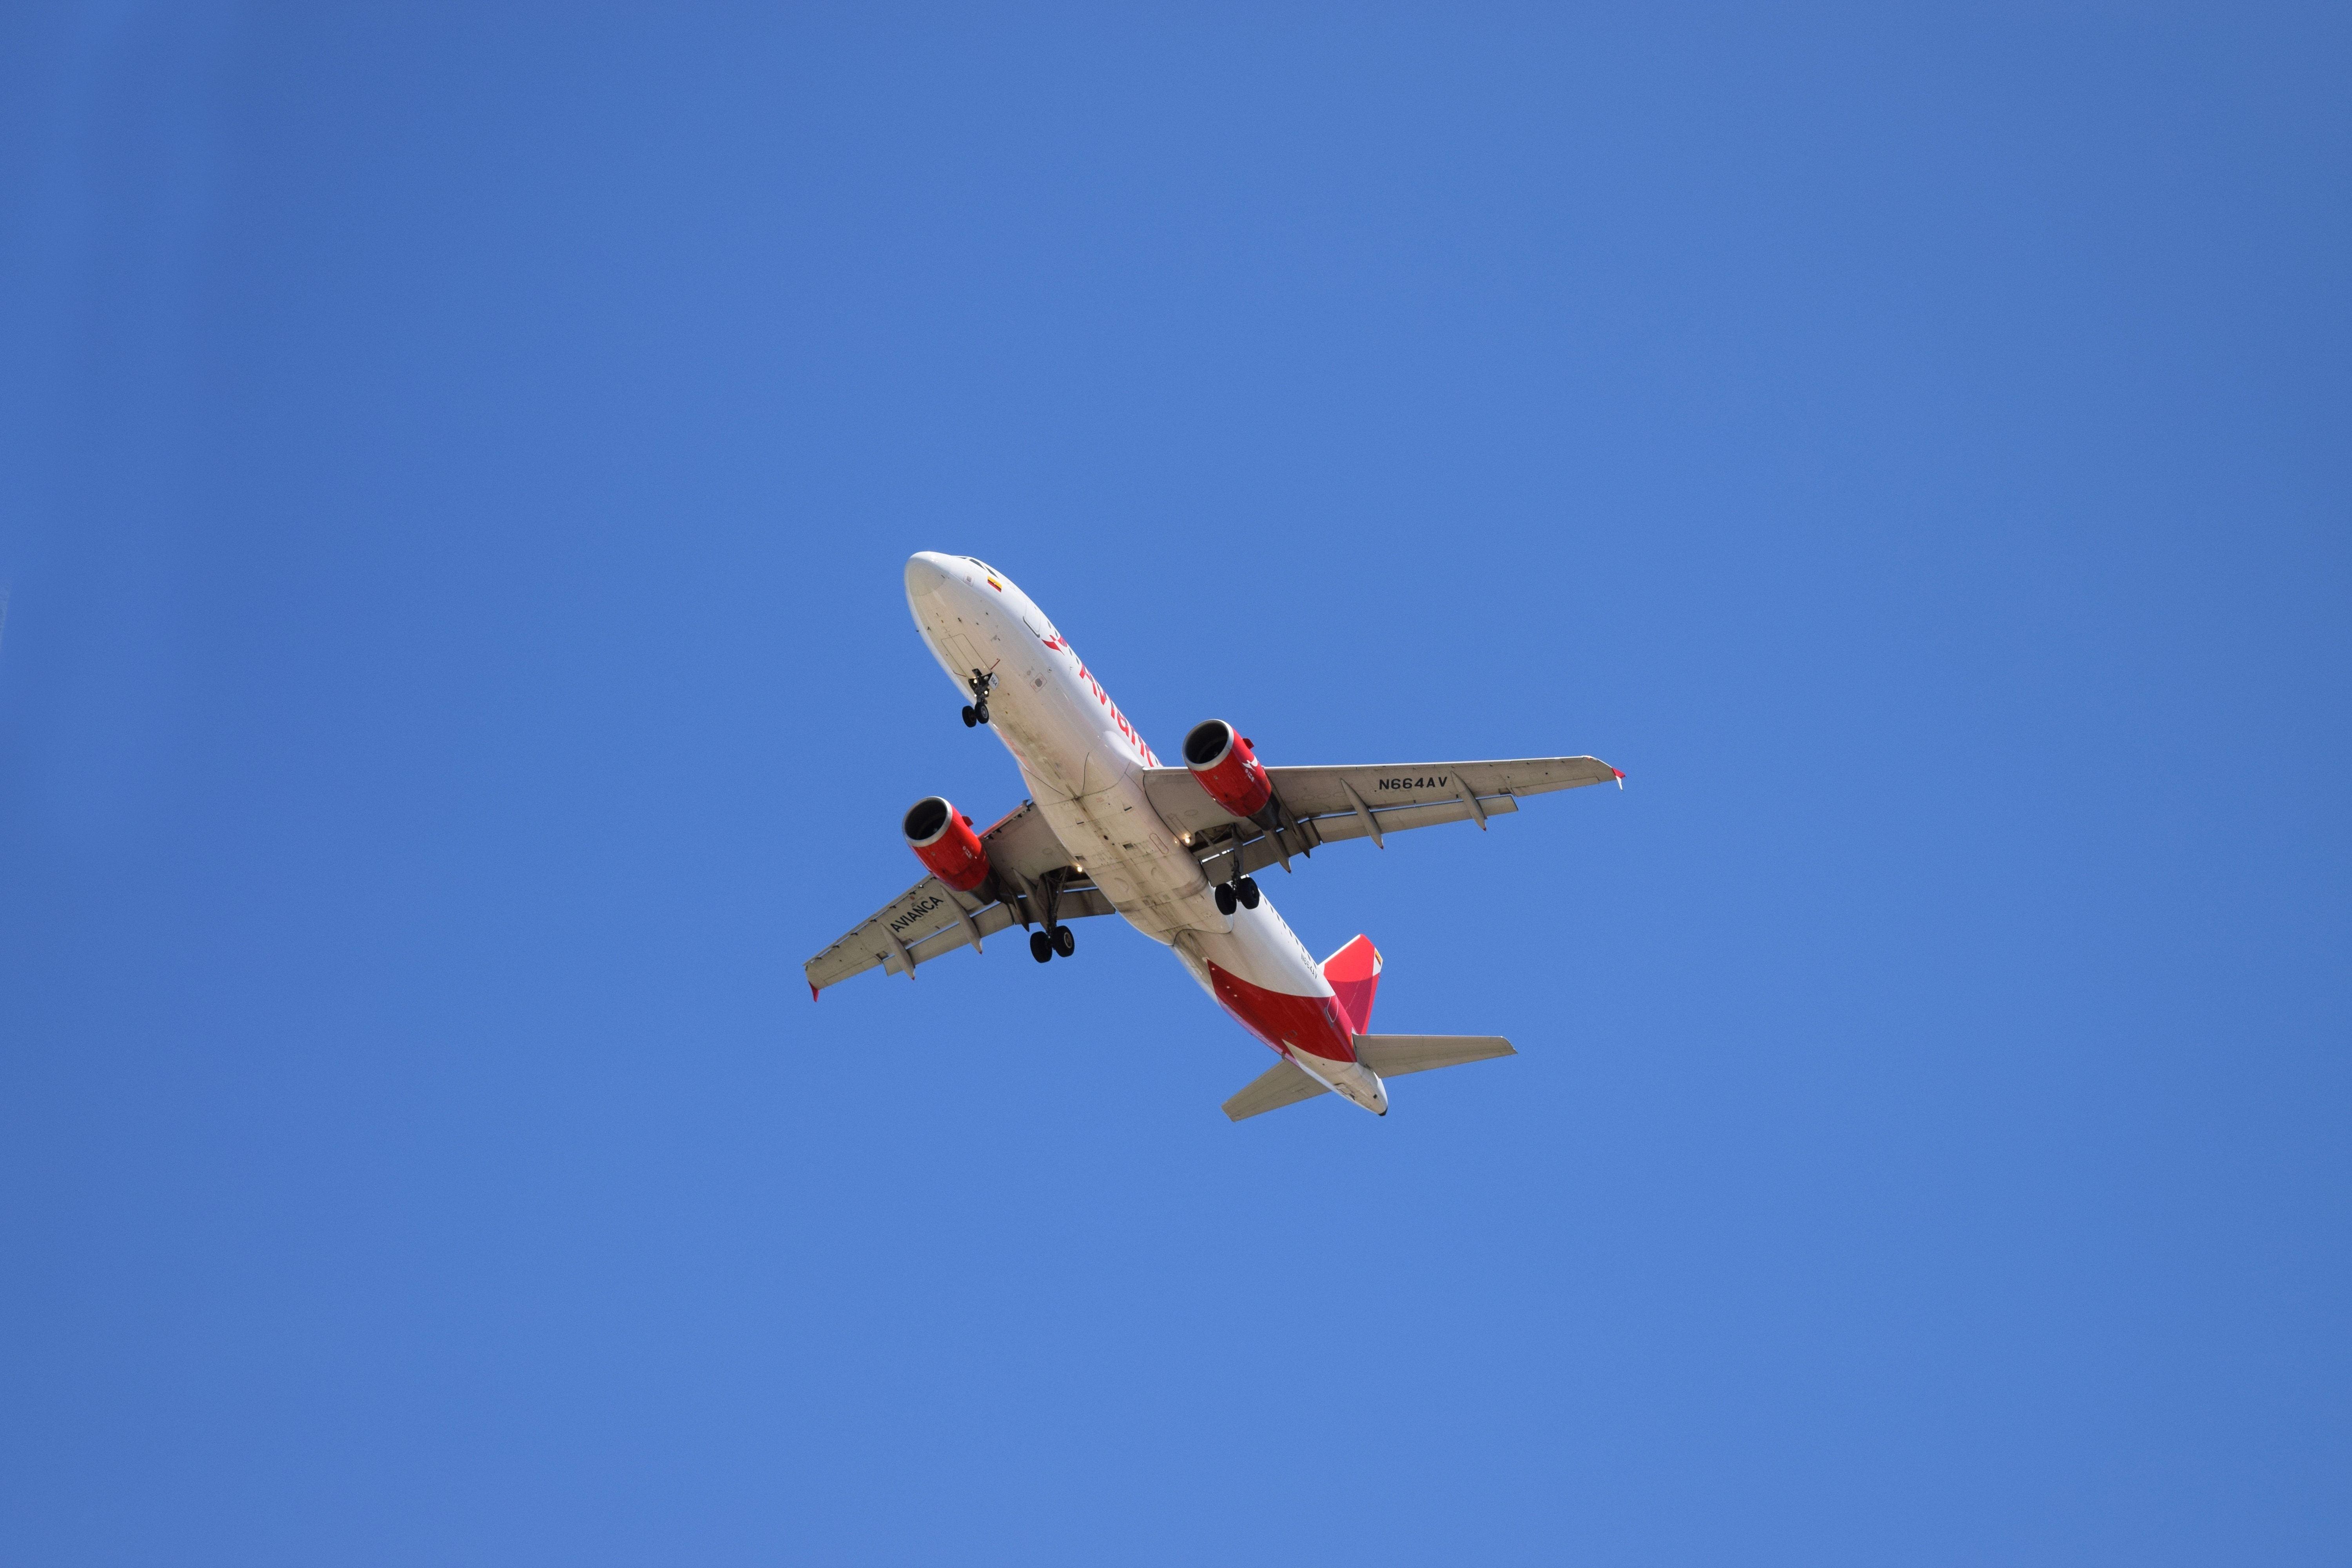 Blue and Red Plane Logo - white and red airplane free image